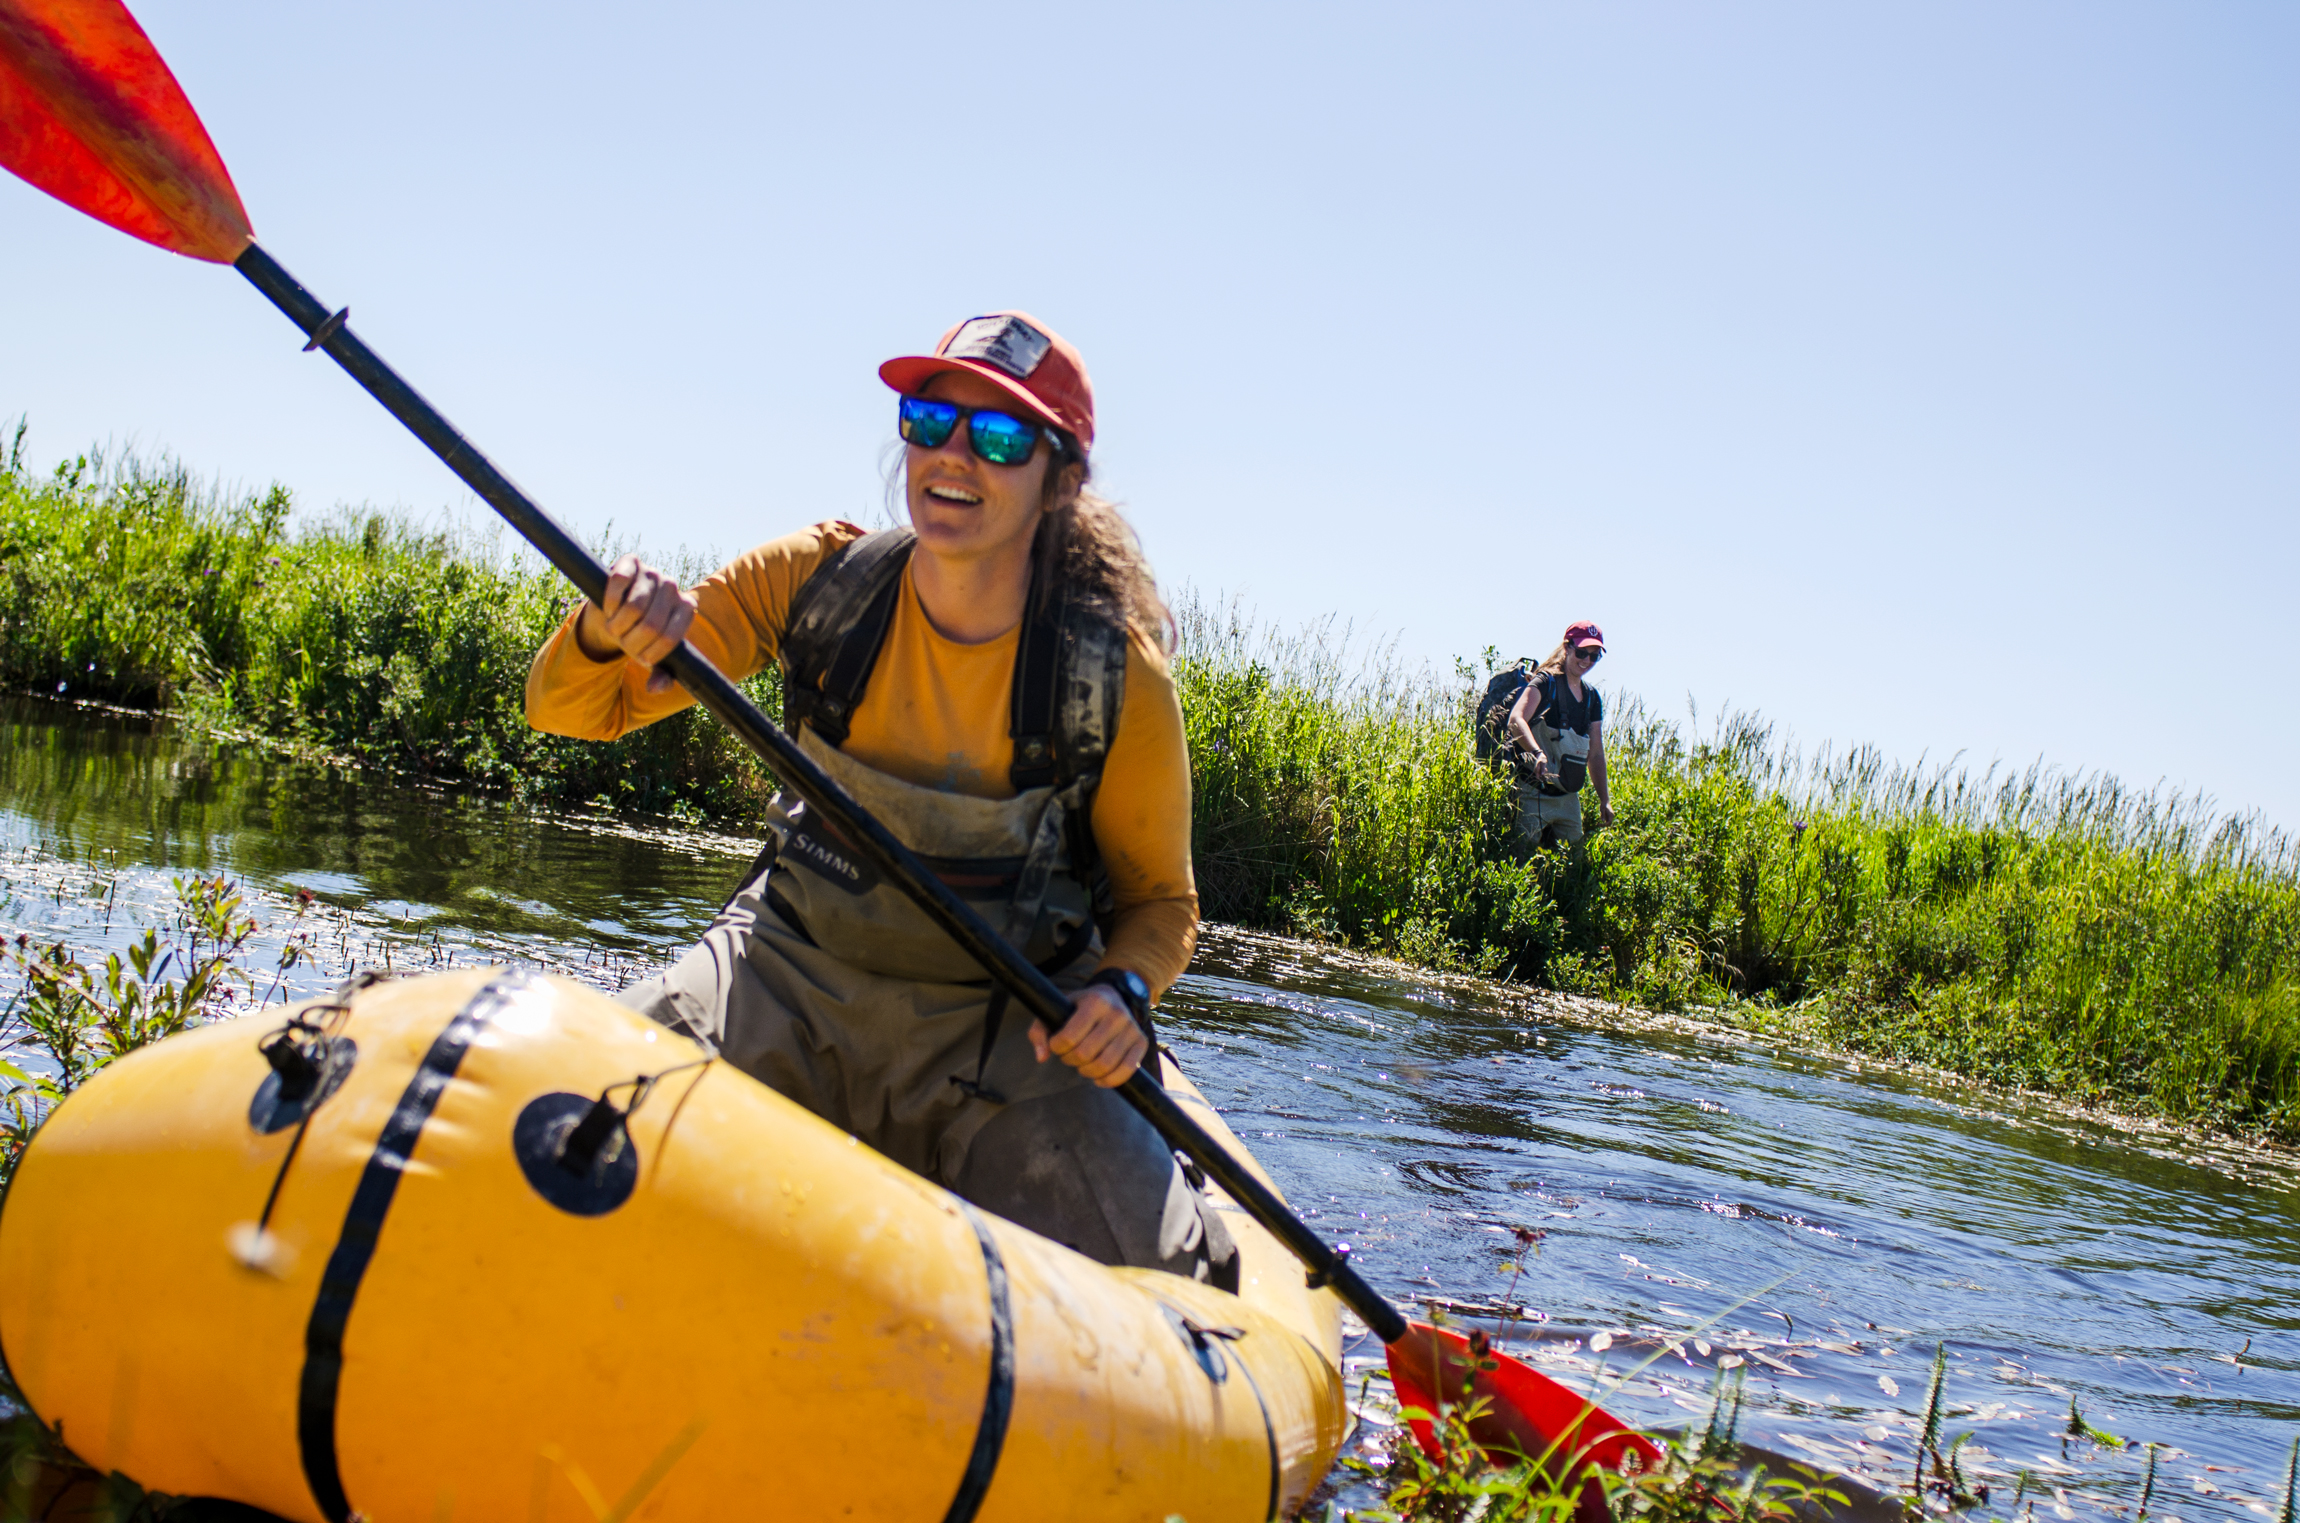  The team uses pack rafts to weave their way through the delta. These inflatable rafts act as handy bridges between ponds, while also keeping the women and their equipment dry. Here, Camarata and her colleague, Amelia McReynolds, tow the raft back an